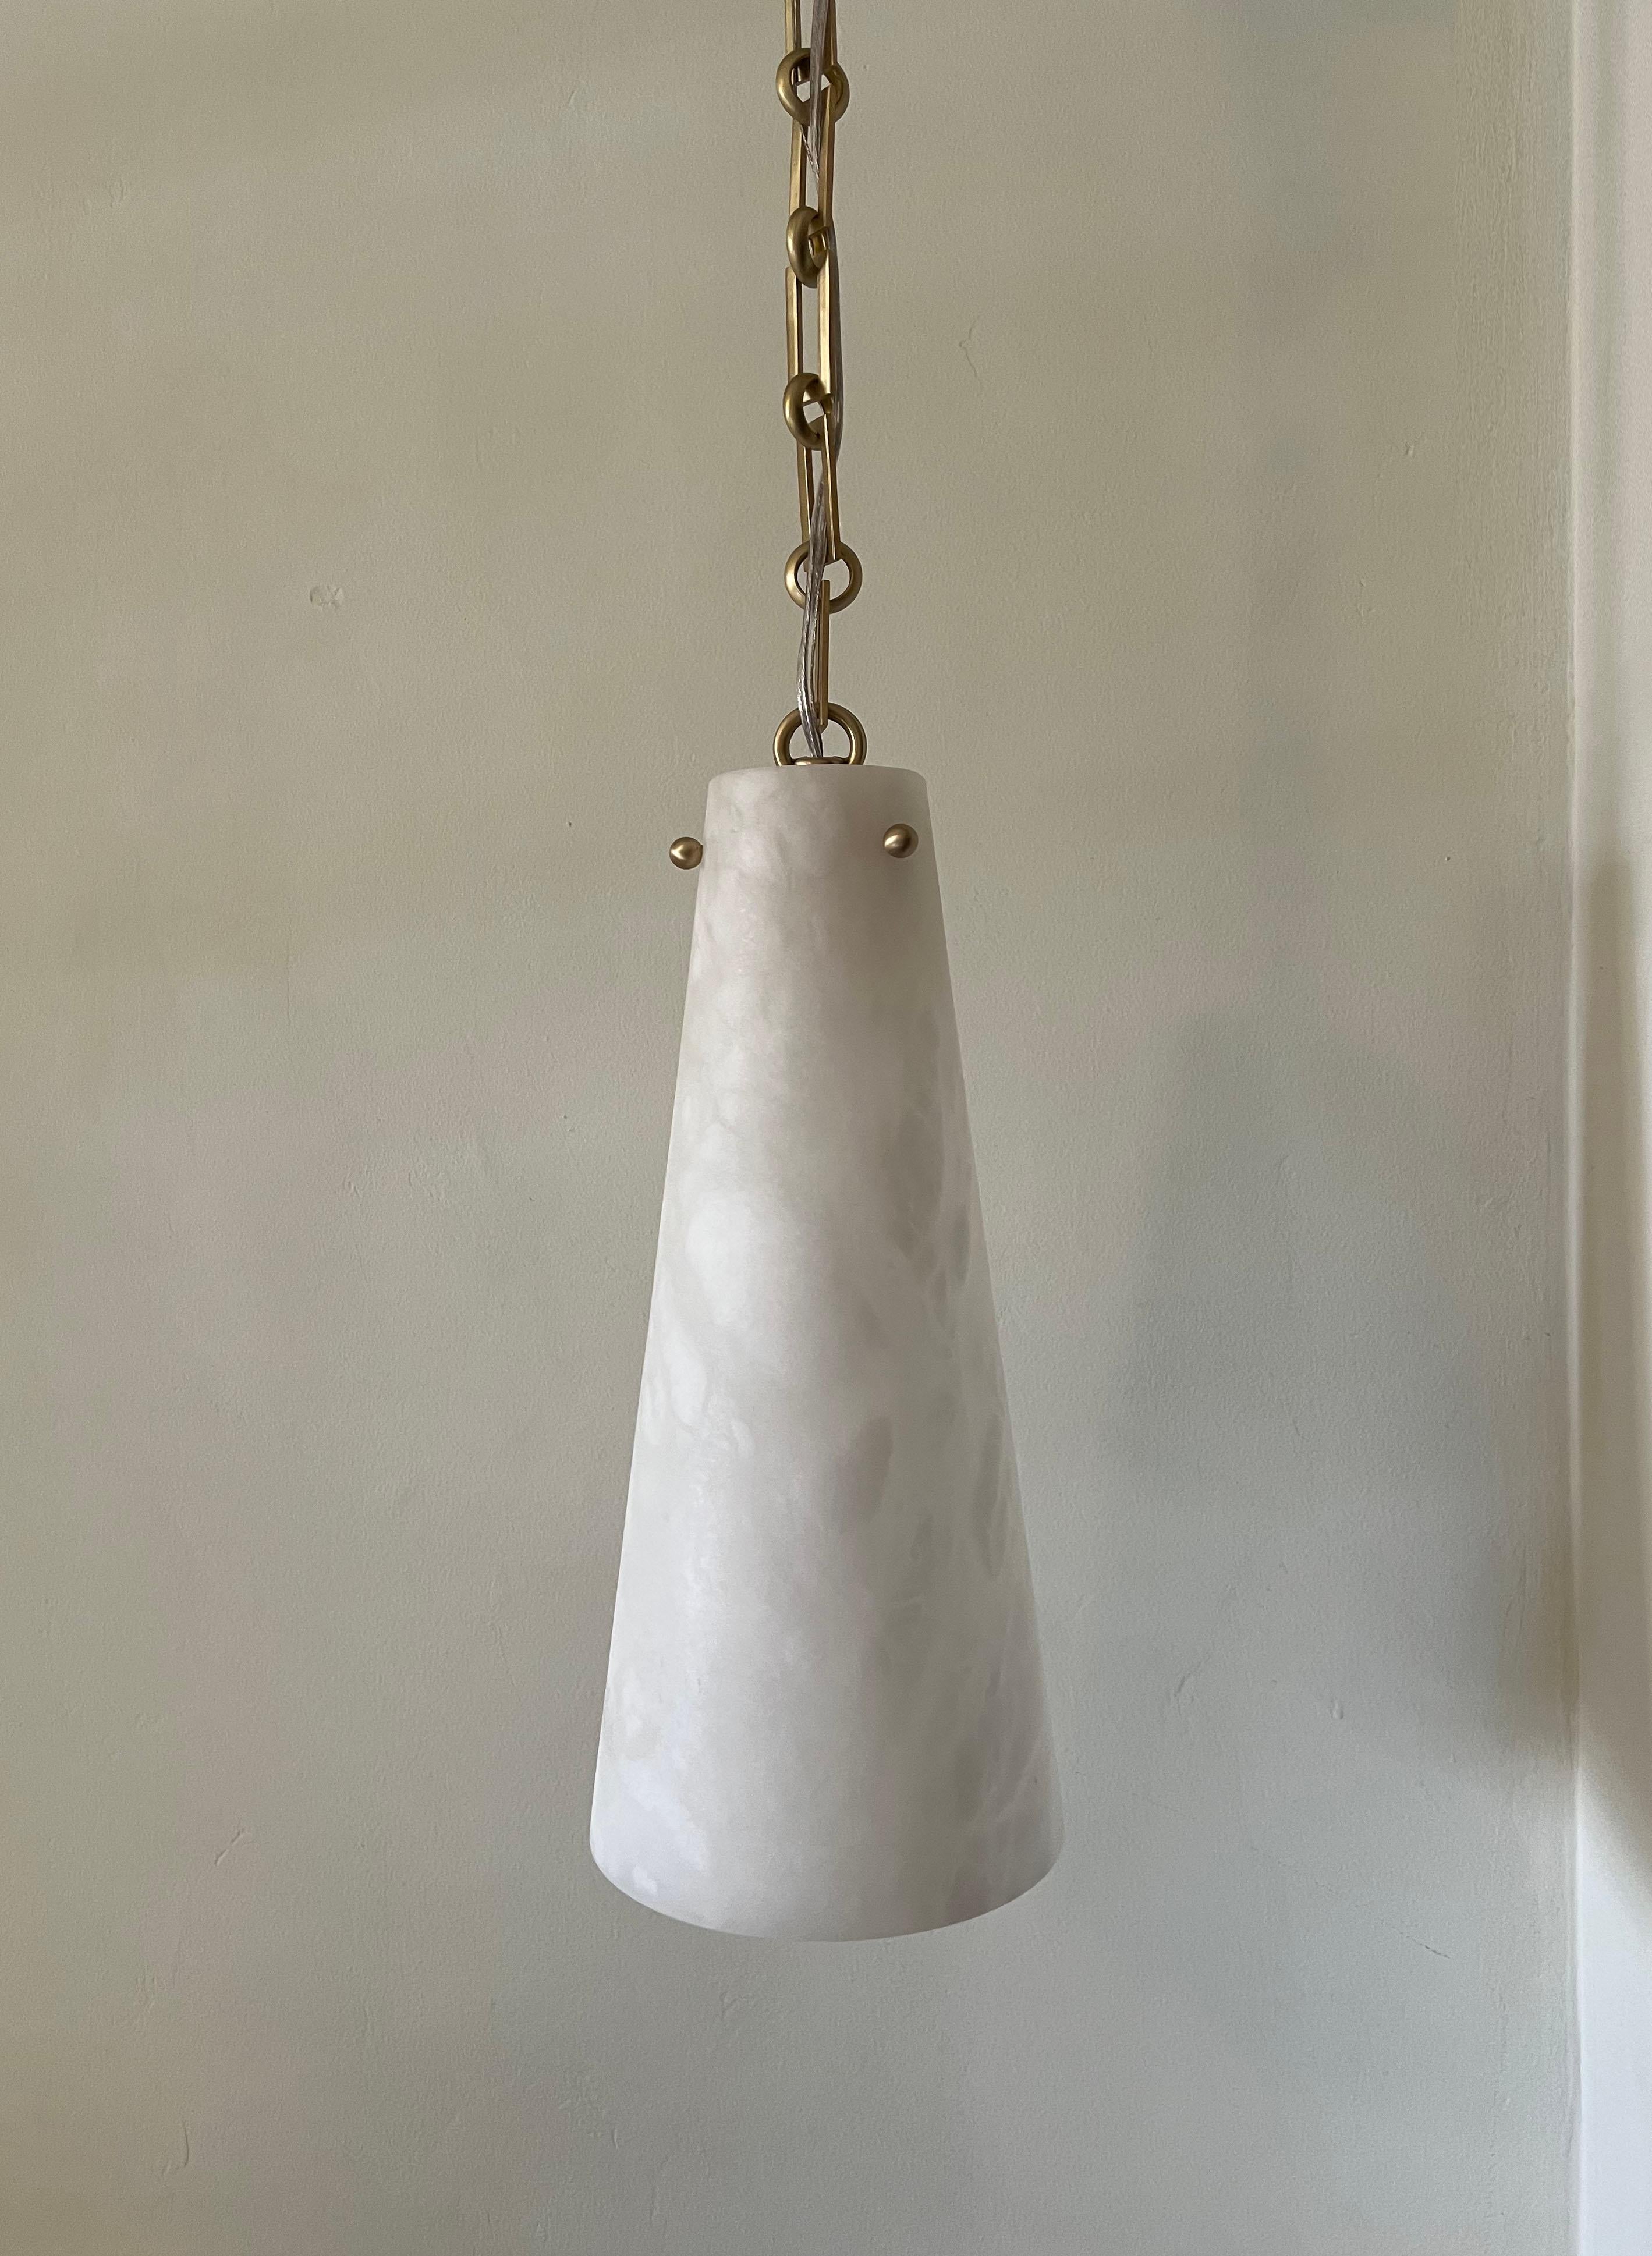 Blackened Contemporary Lucca Pendant 202A in Alabaster by Orphan Work, 2021 For Sale